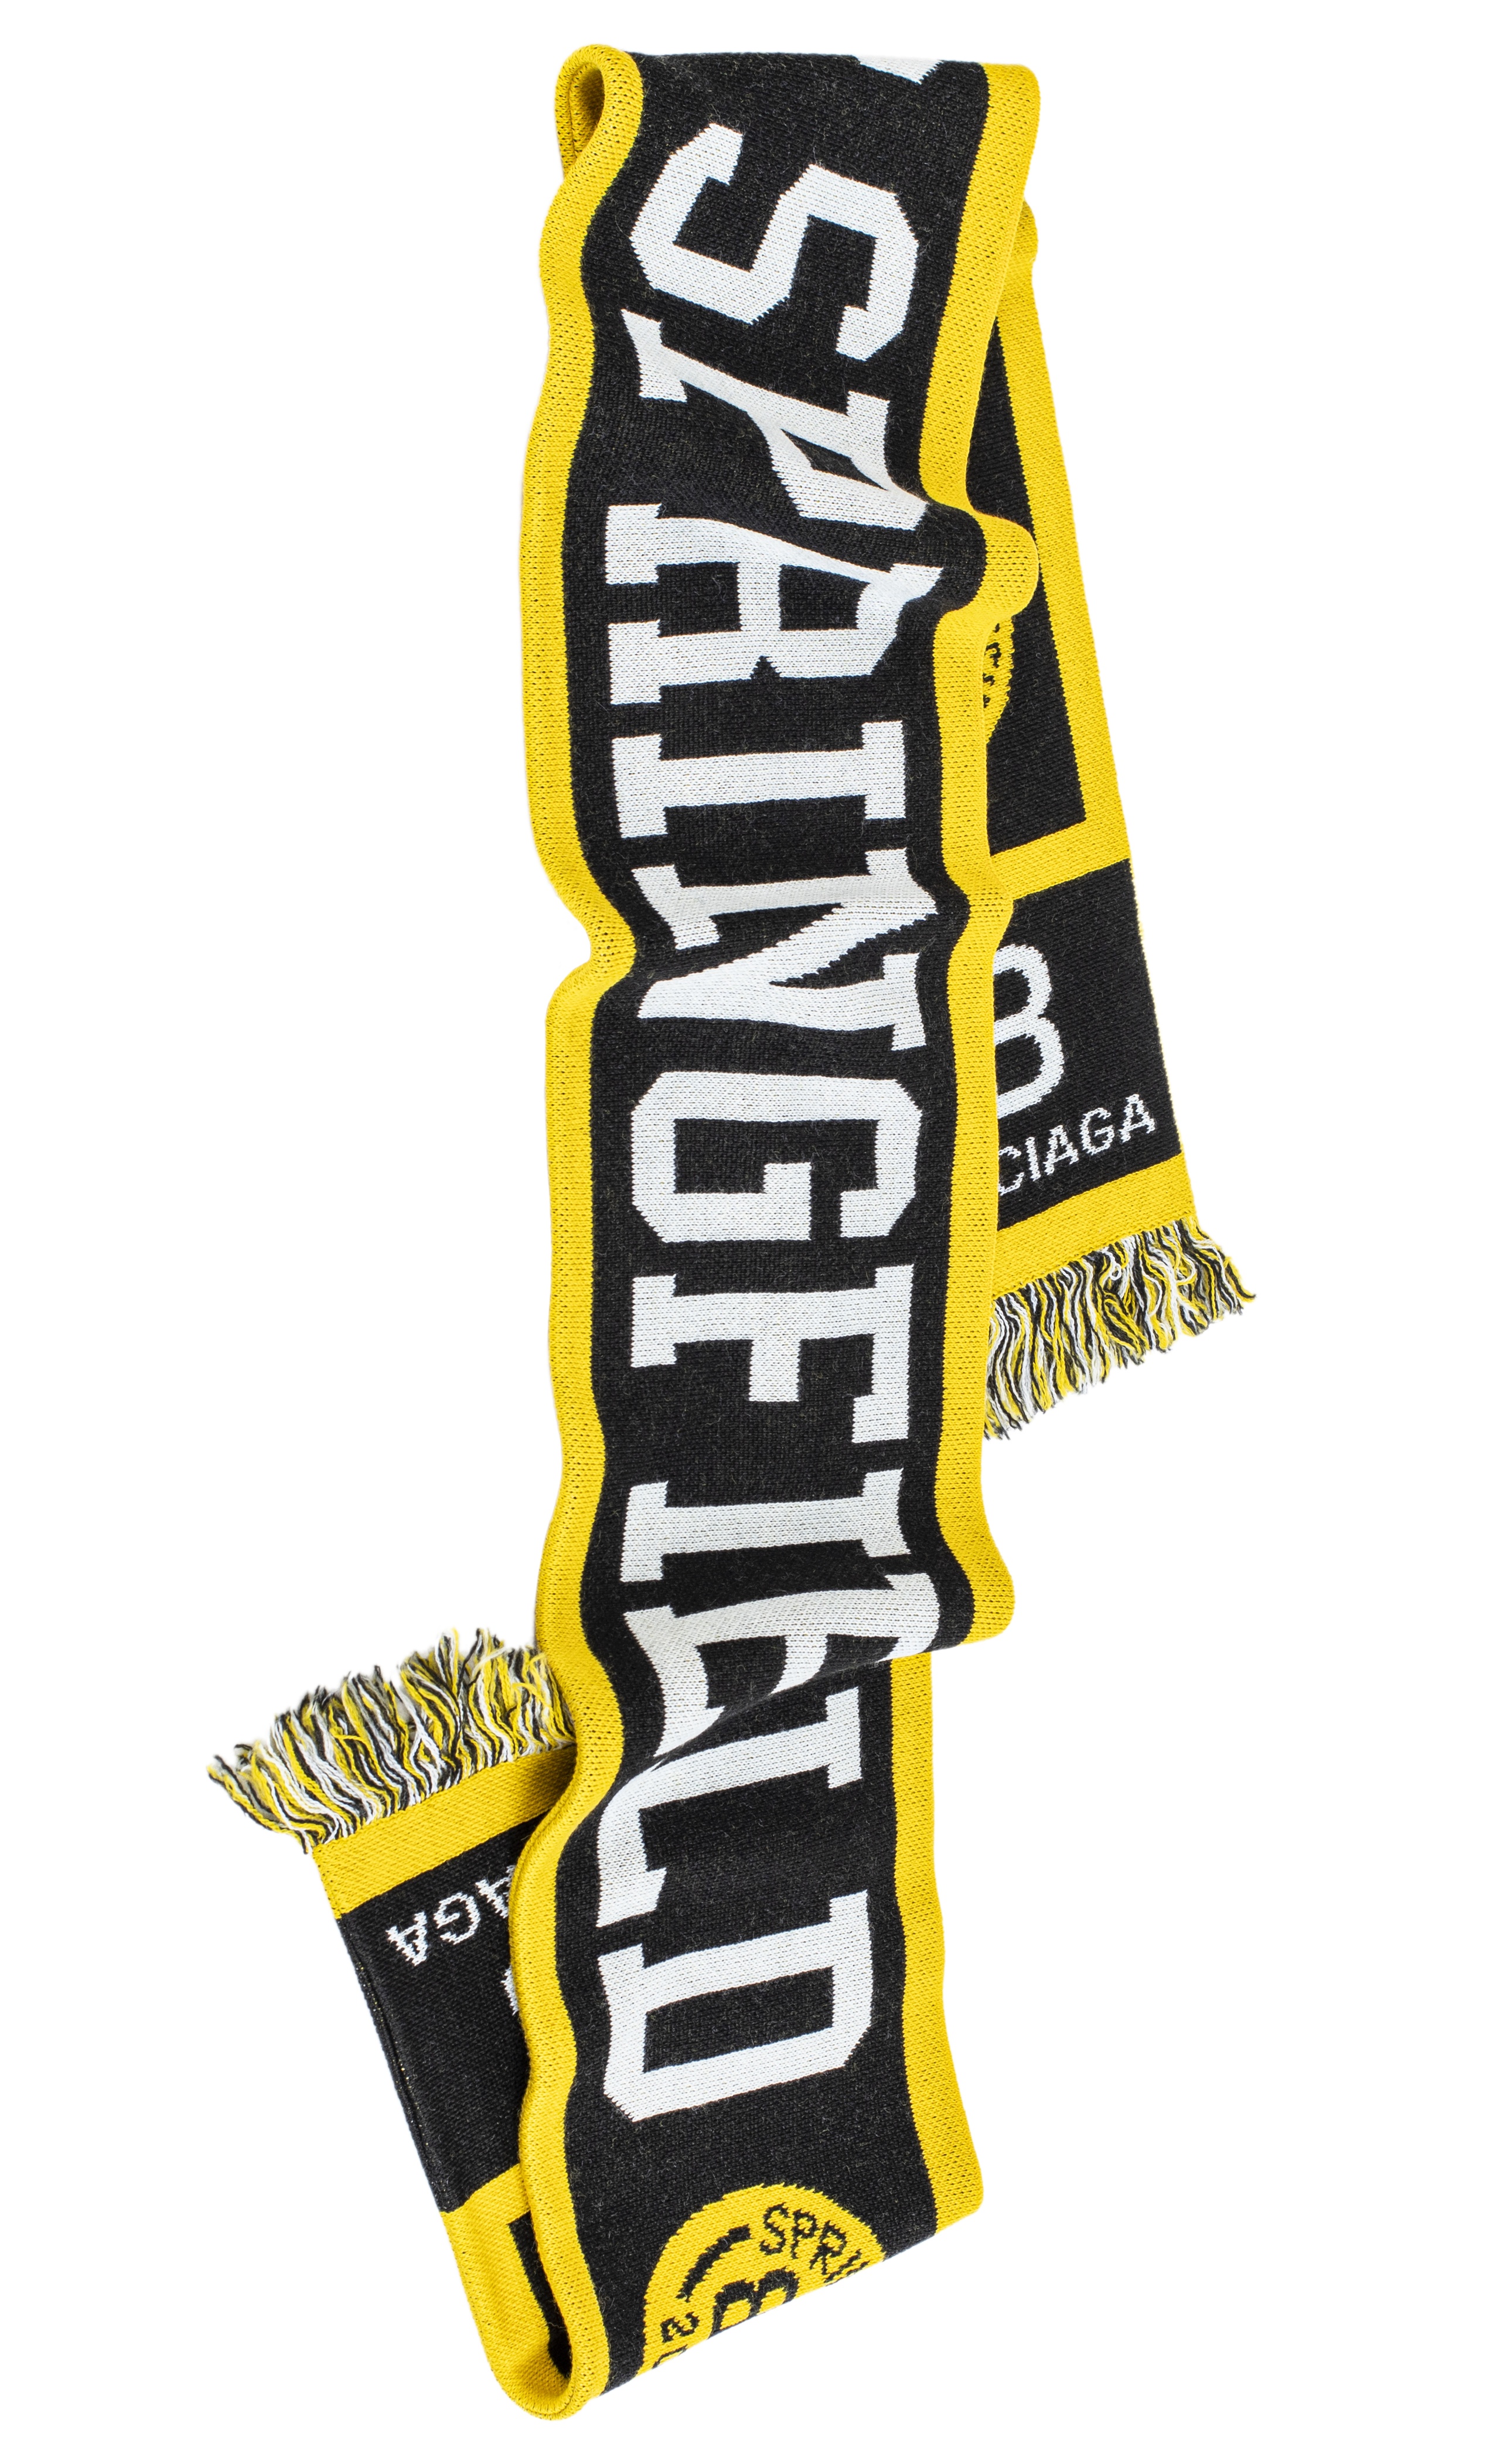 THE SIMPSONS SPRINGFIELD SCARF - 1